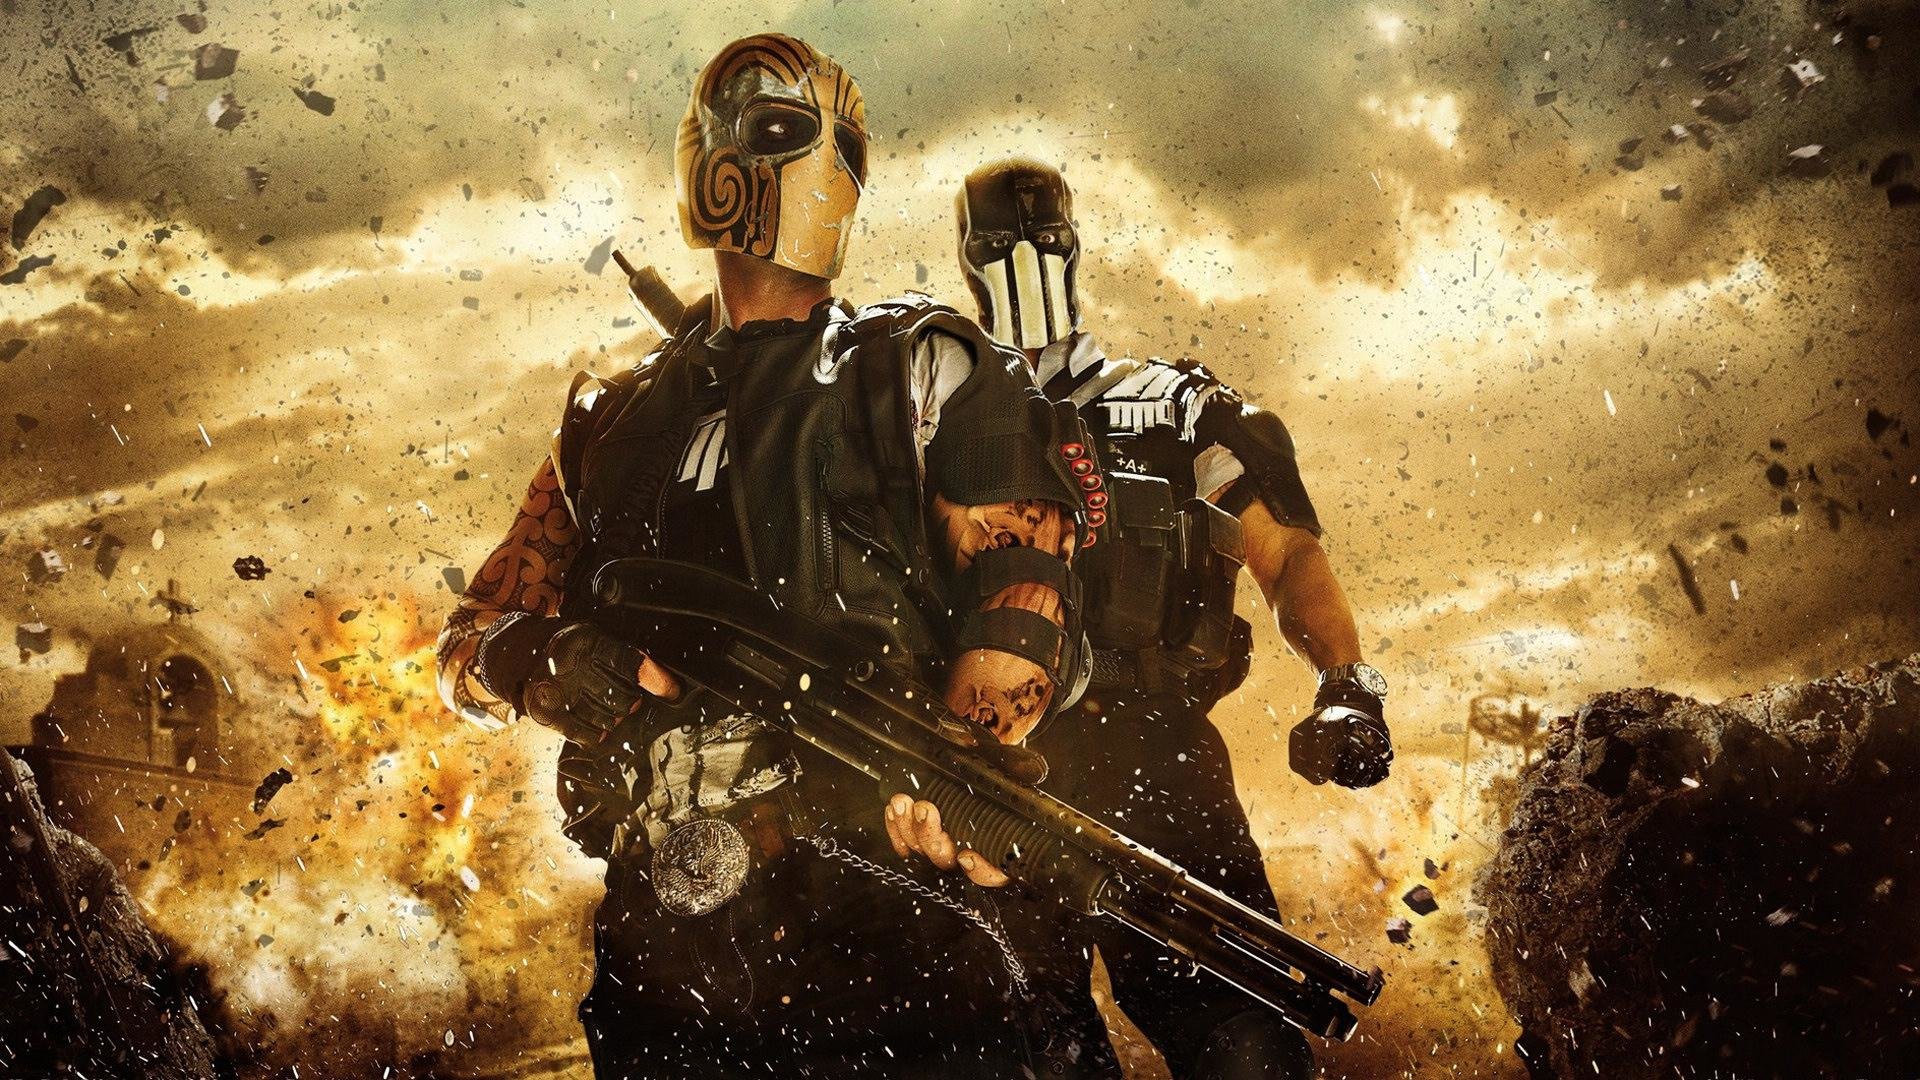 Awesome Army Of Two: The Devil's Cartel free background ID:445291 for hd 1080p desktop